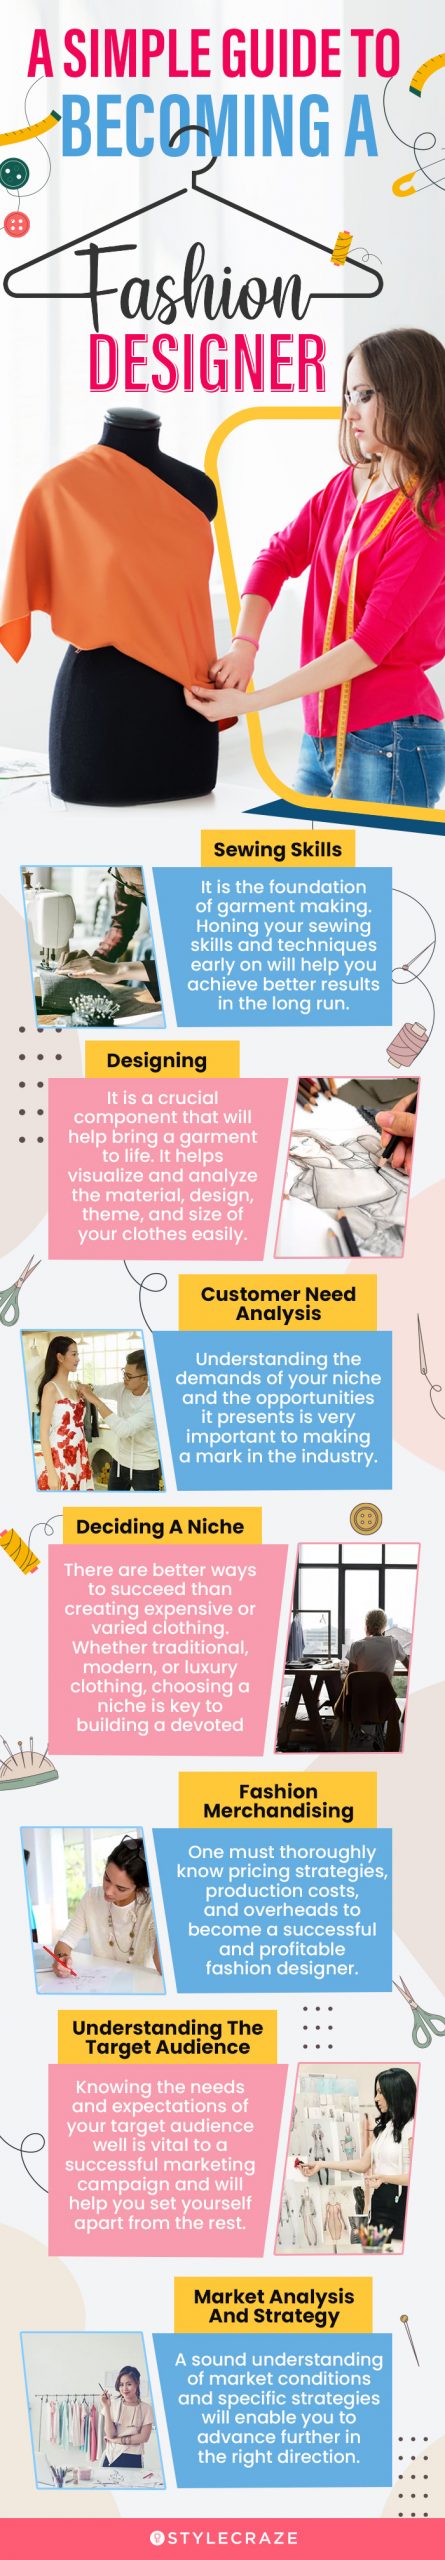 a simple guide to becoming a fashion designer (infographic)